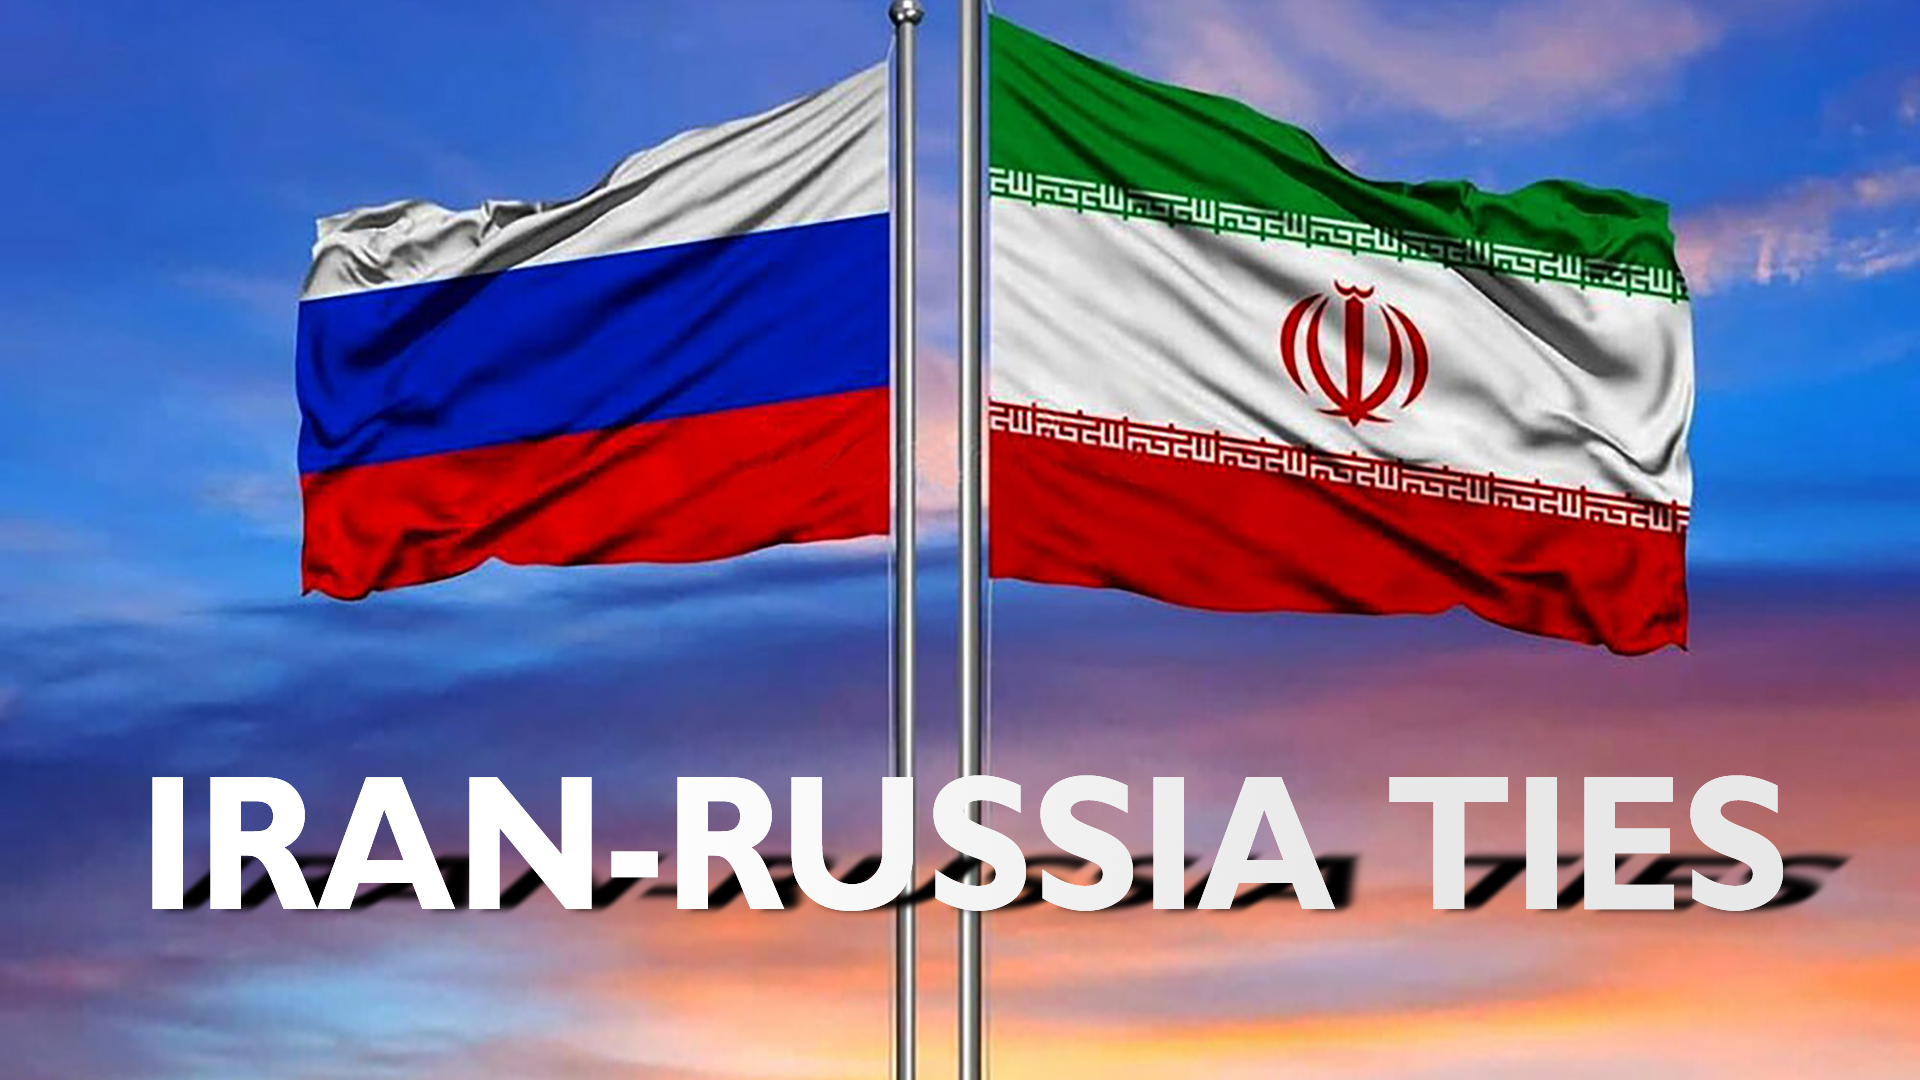 Largest Russian delegation in Iran